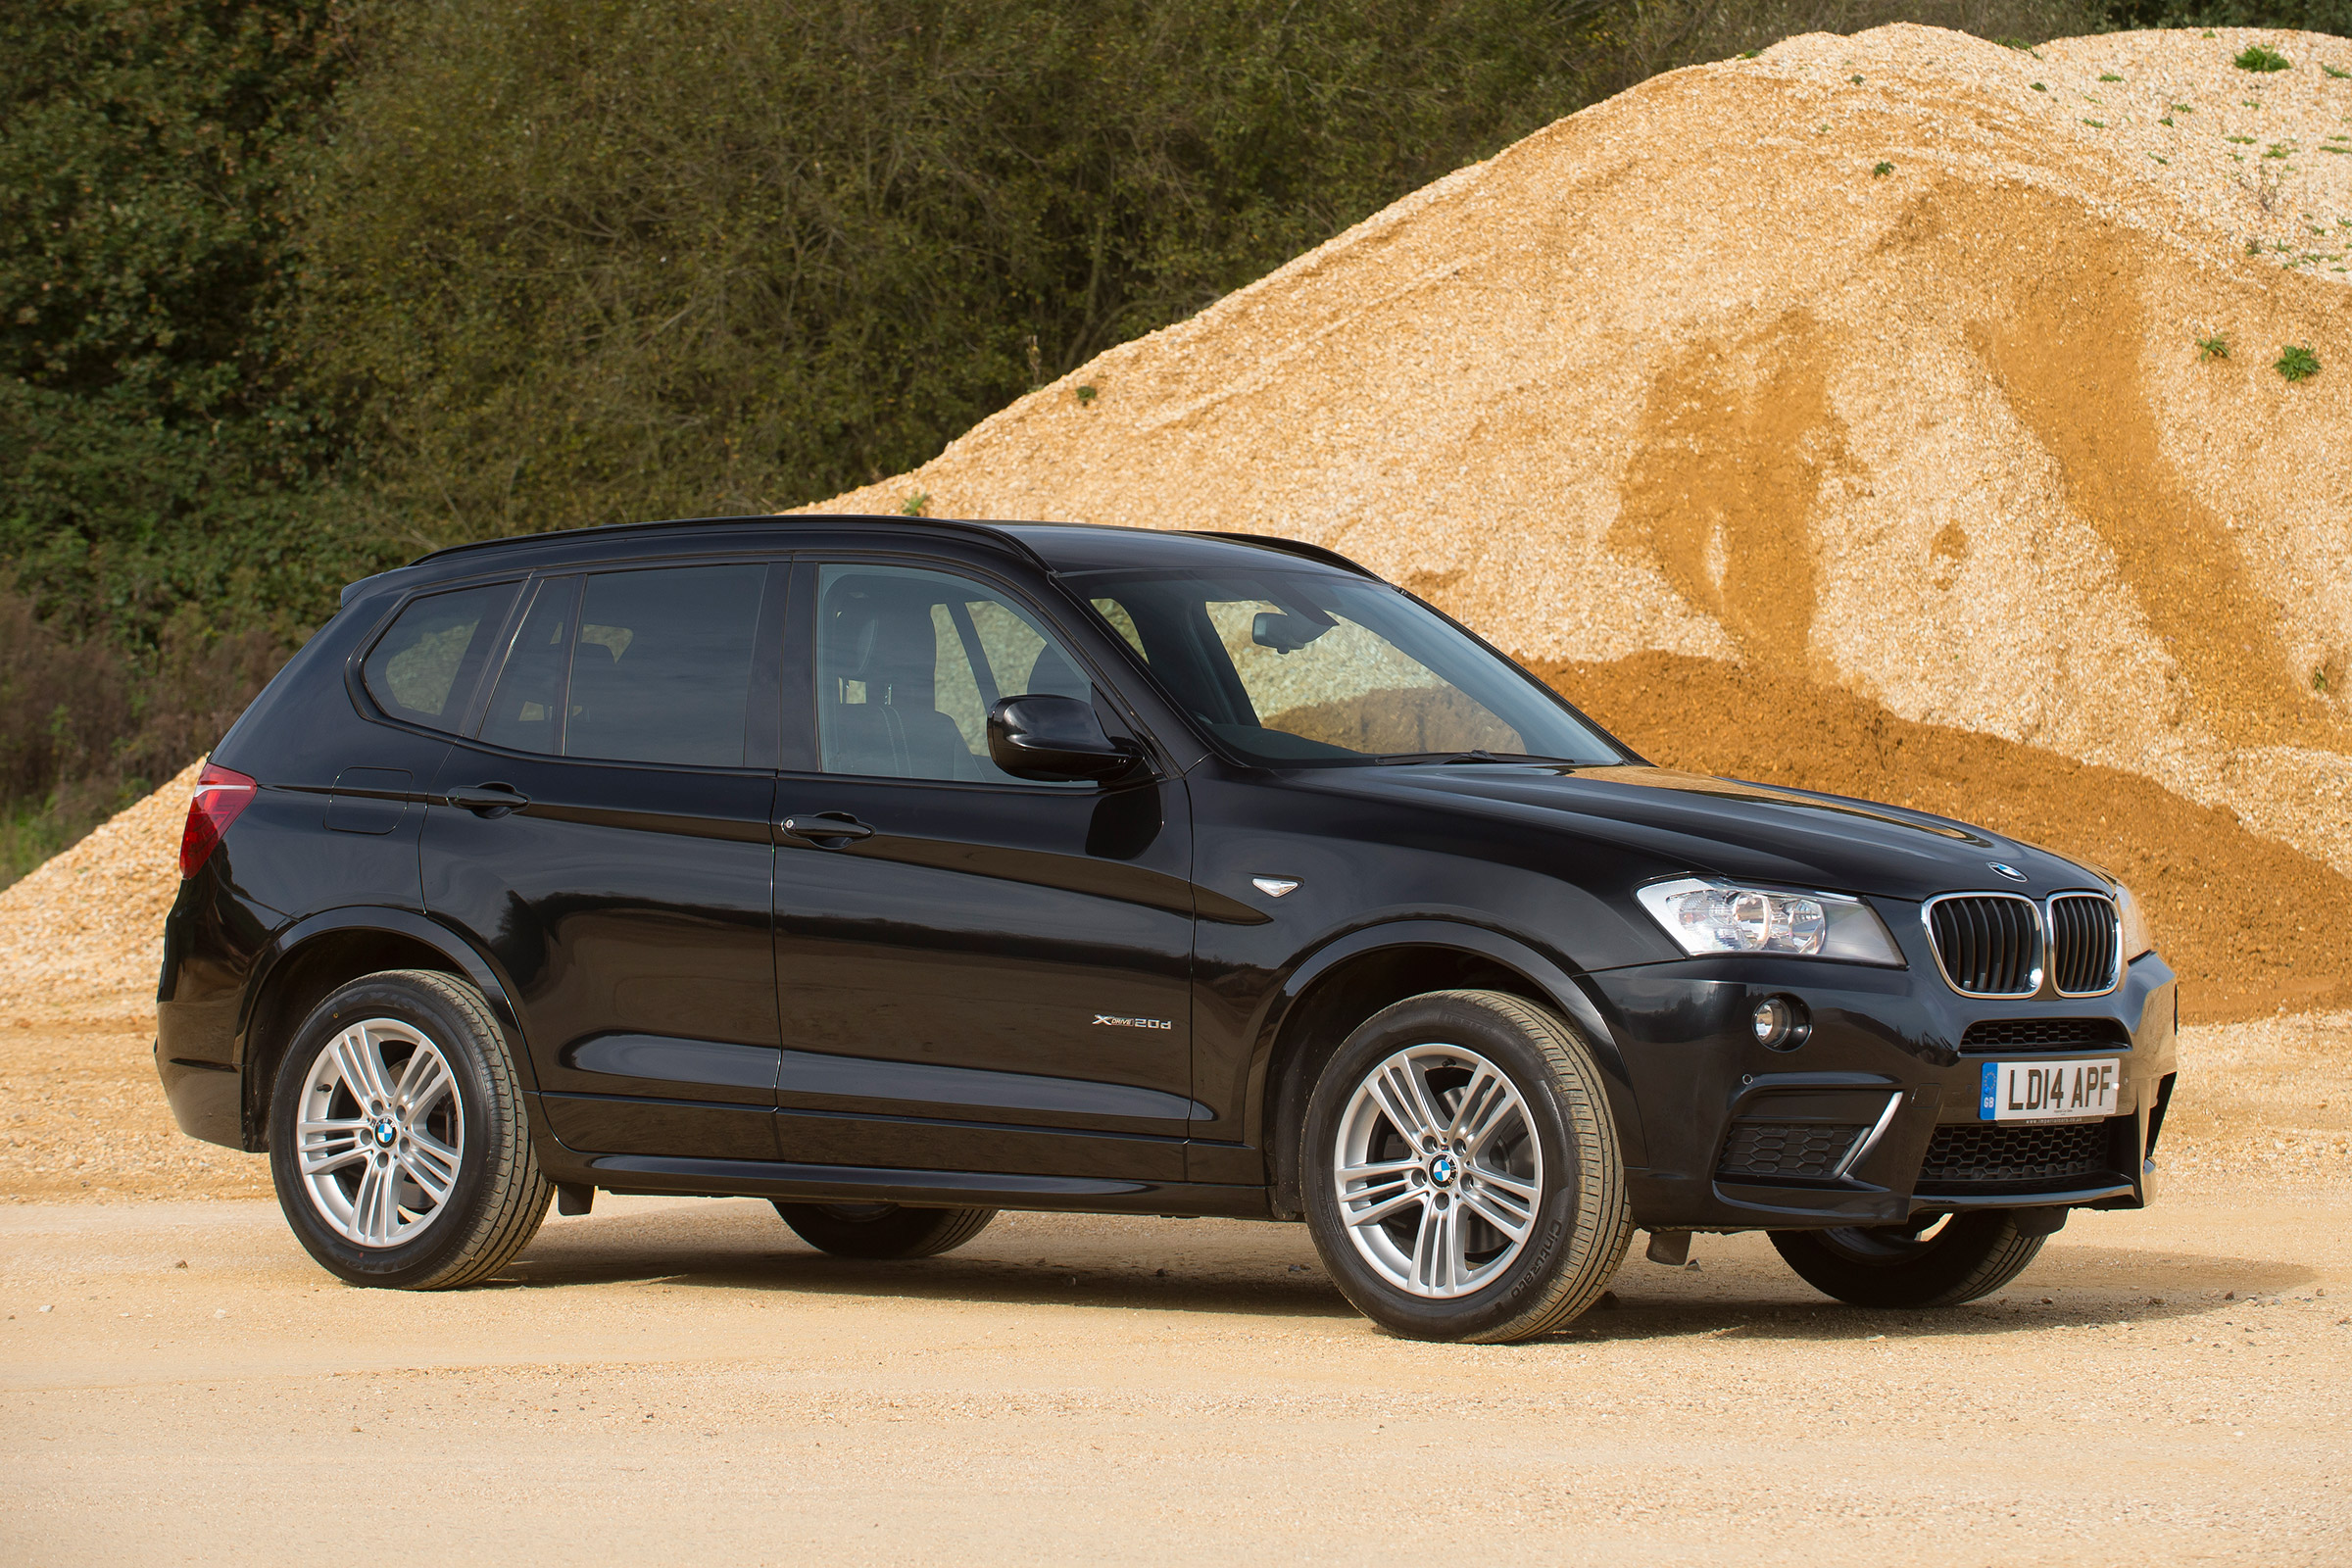 Used BMW X3 review | Auto Express